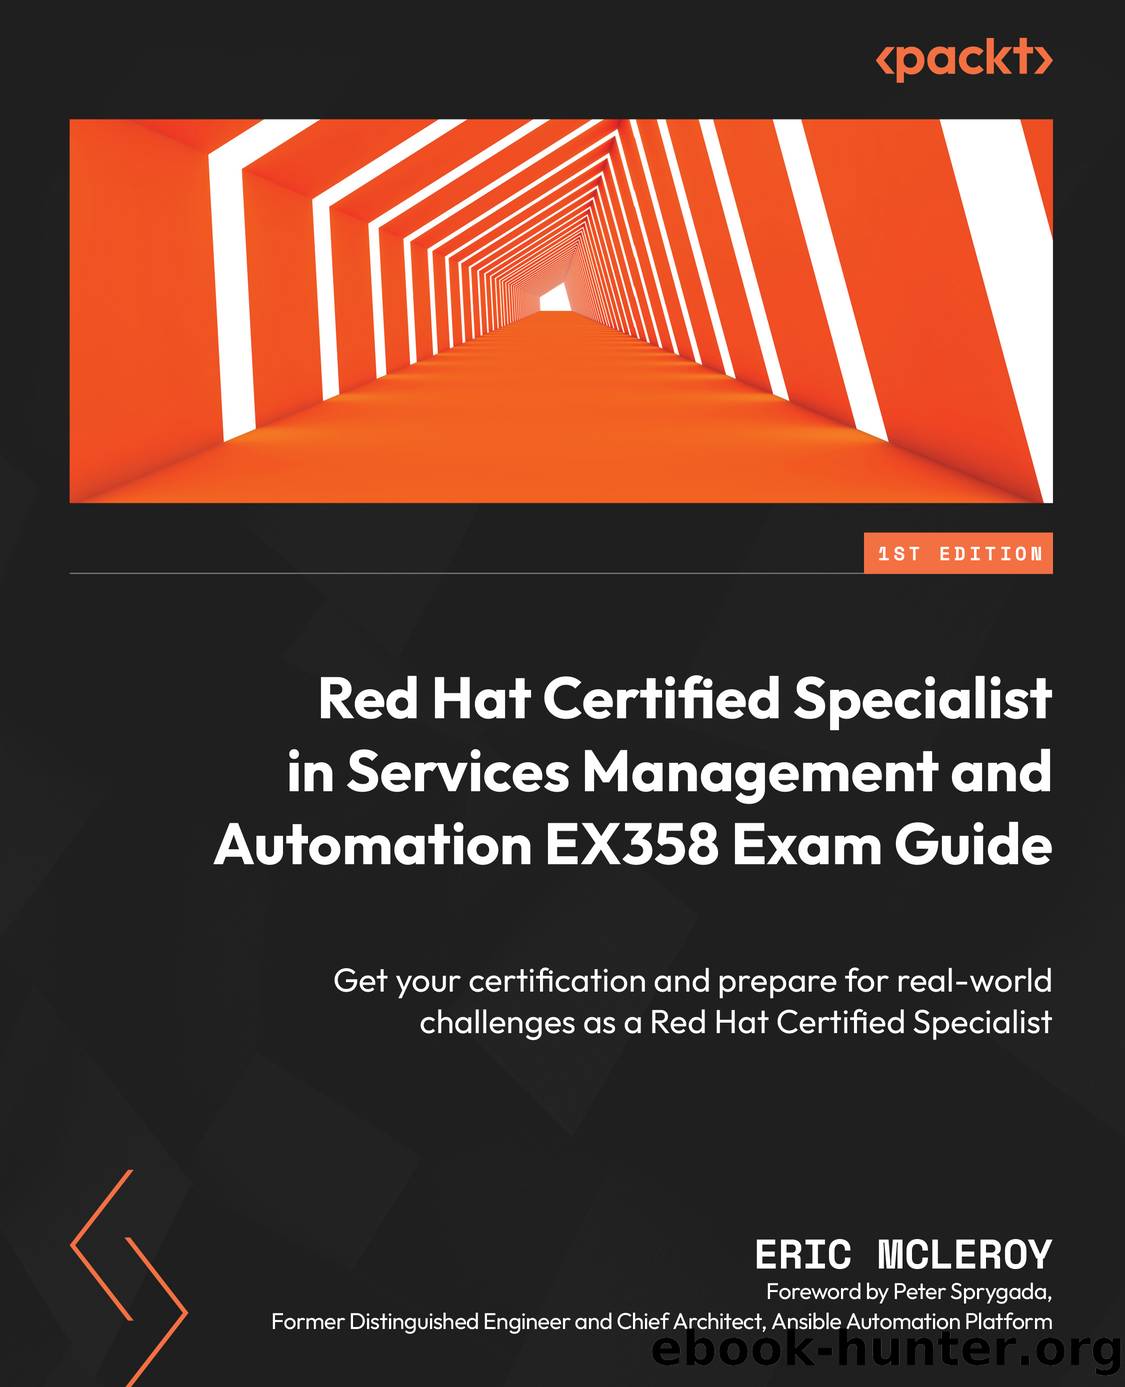 Red Hat Certified Specialist in Services Management and Automation EX358 Exam Guide by Eric McLeroy